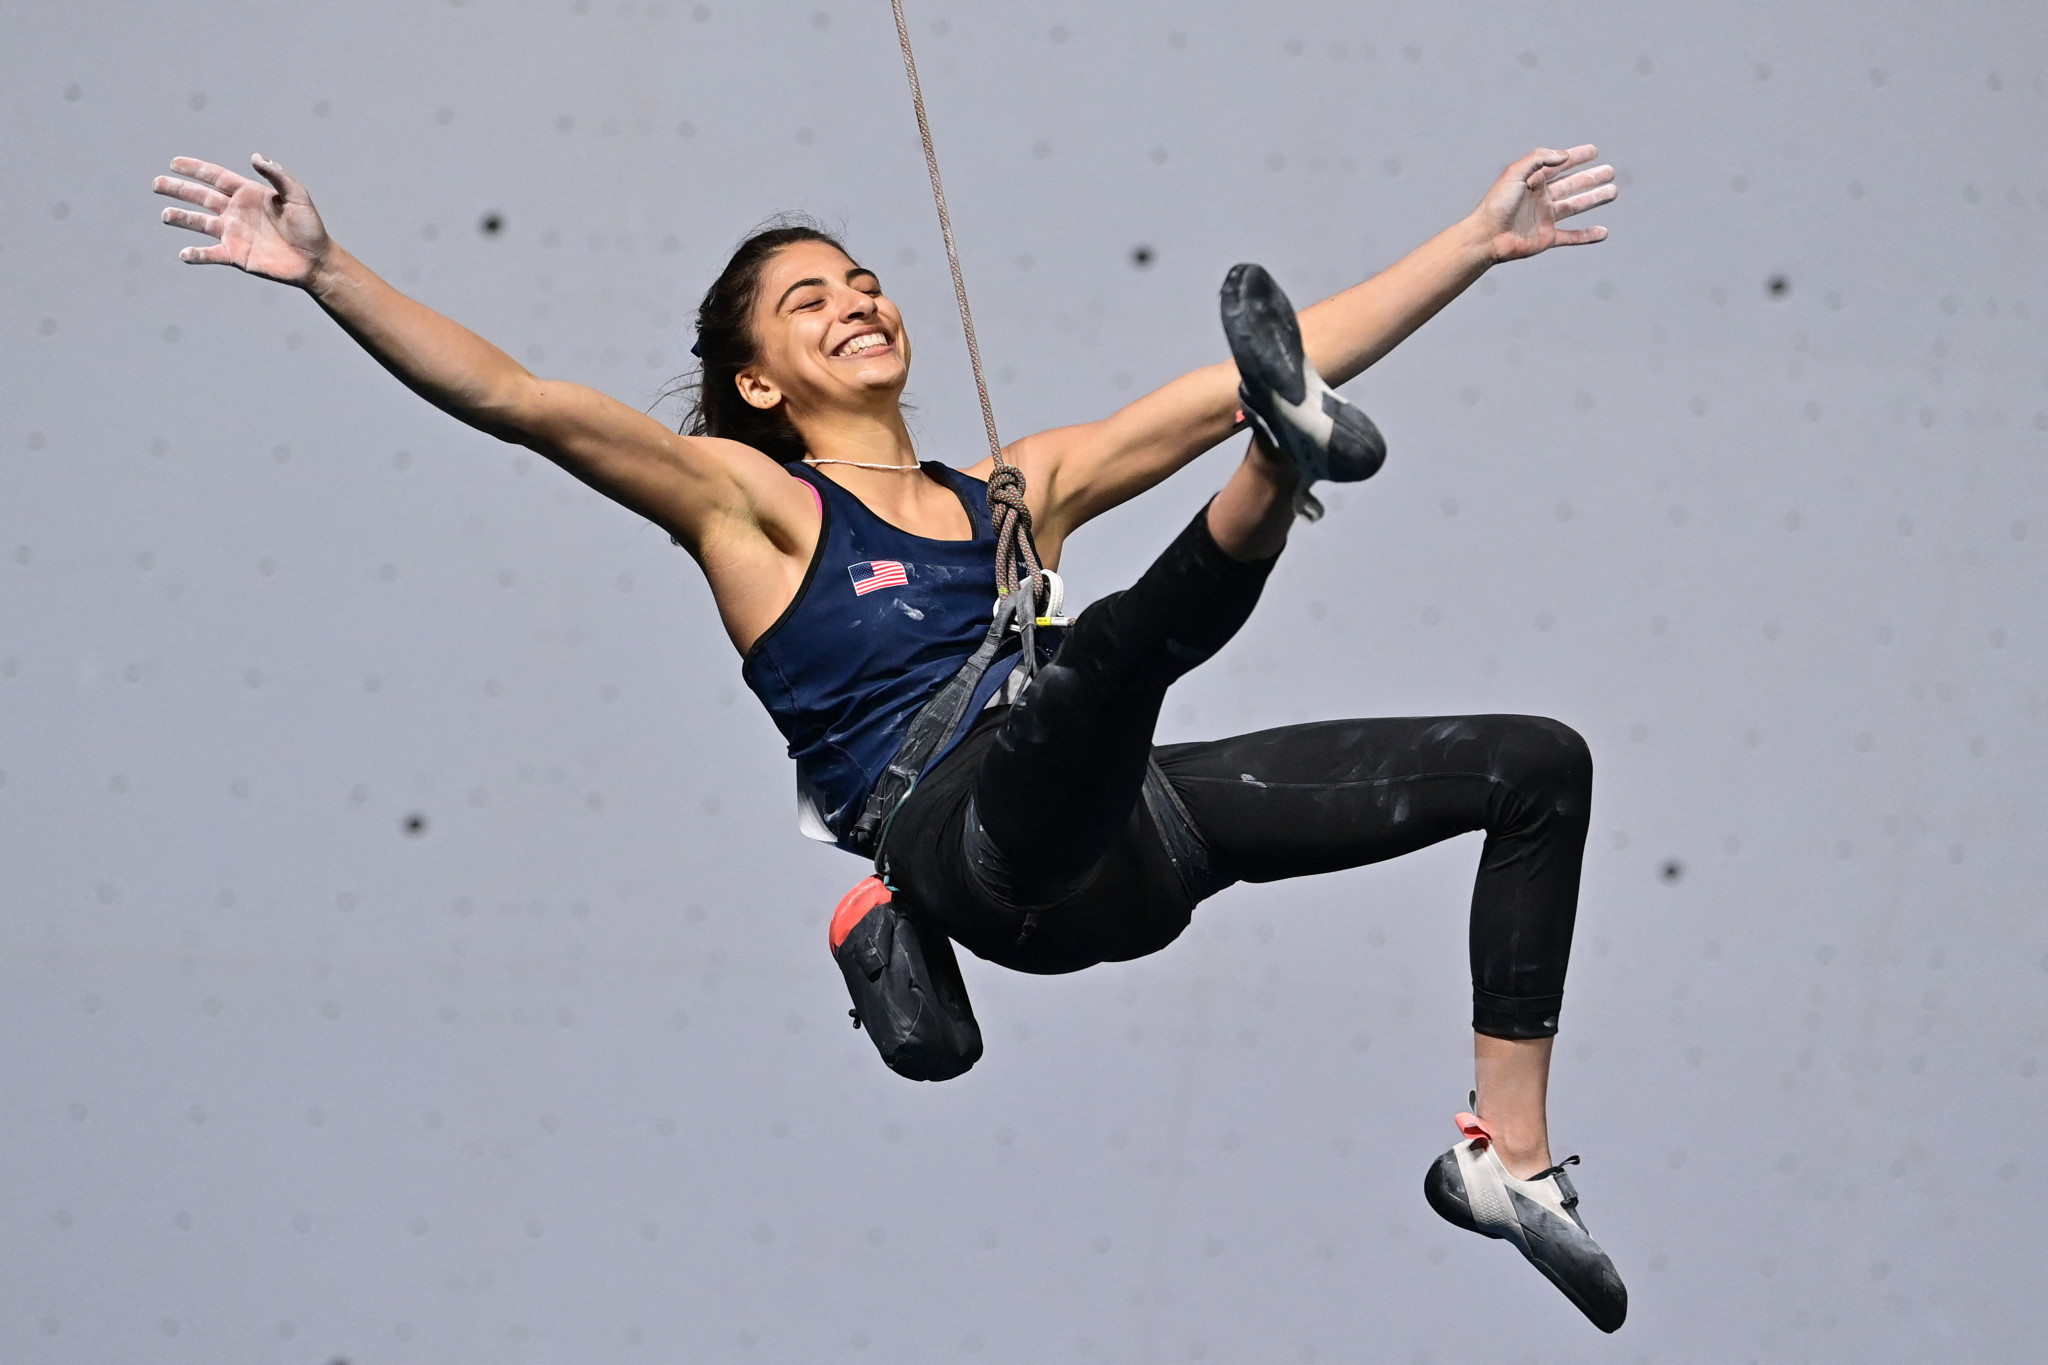 Natalia Grossman ensured that the United States completed a clean sweep of the four sport climbing gold medals ©Getty Images